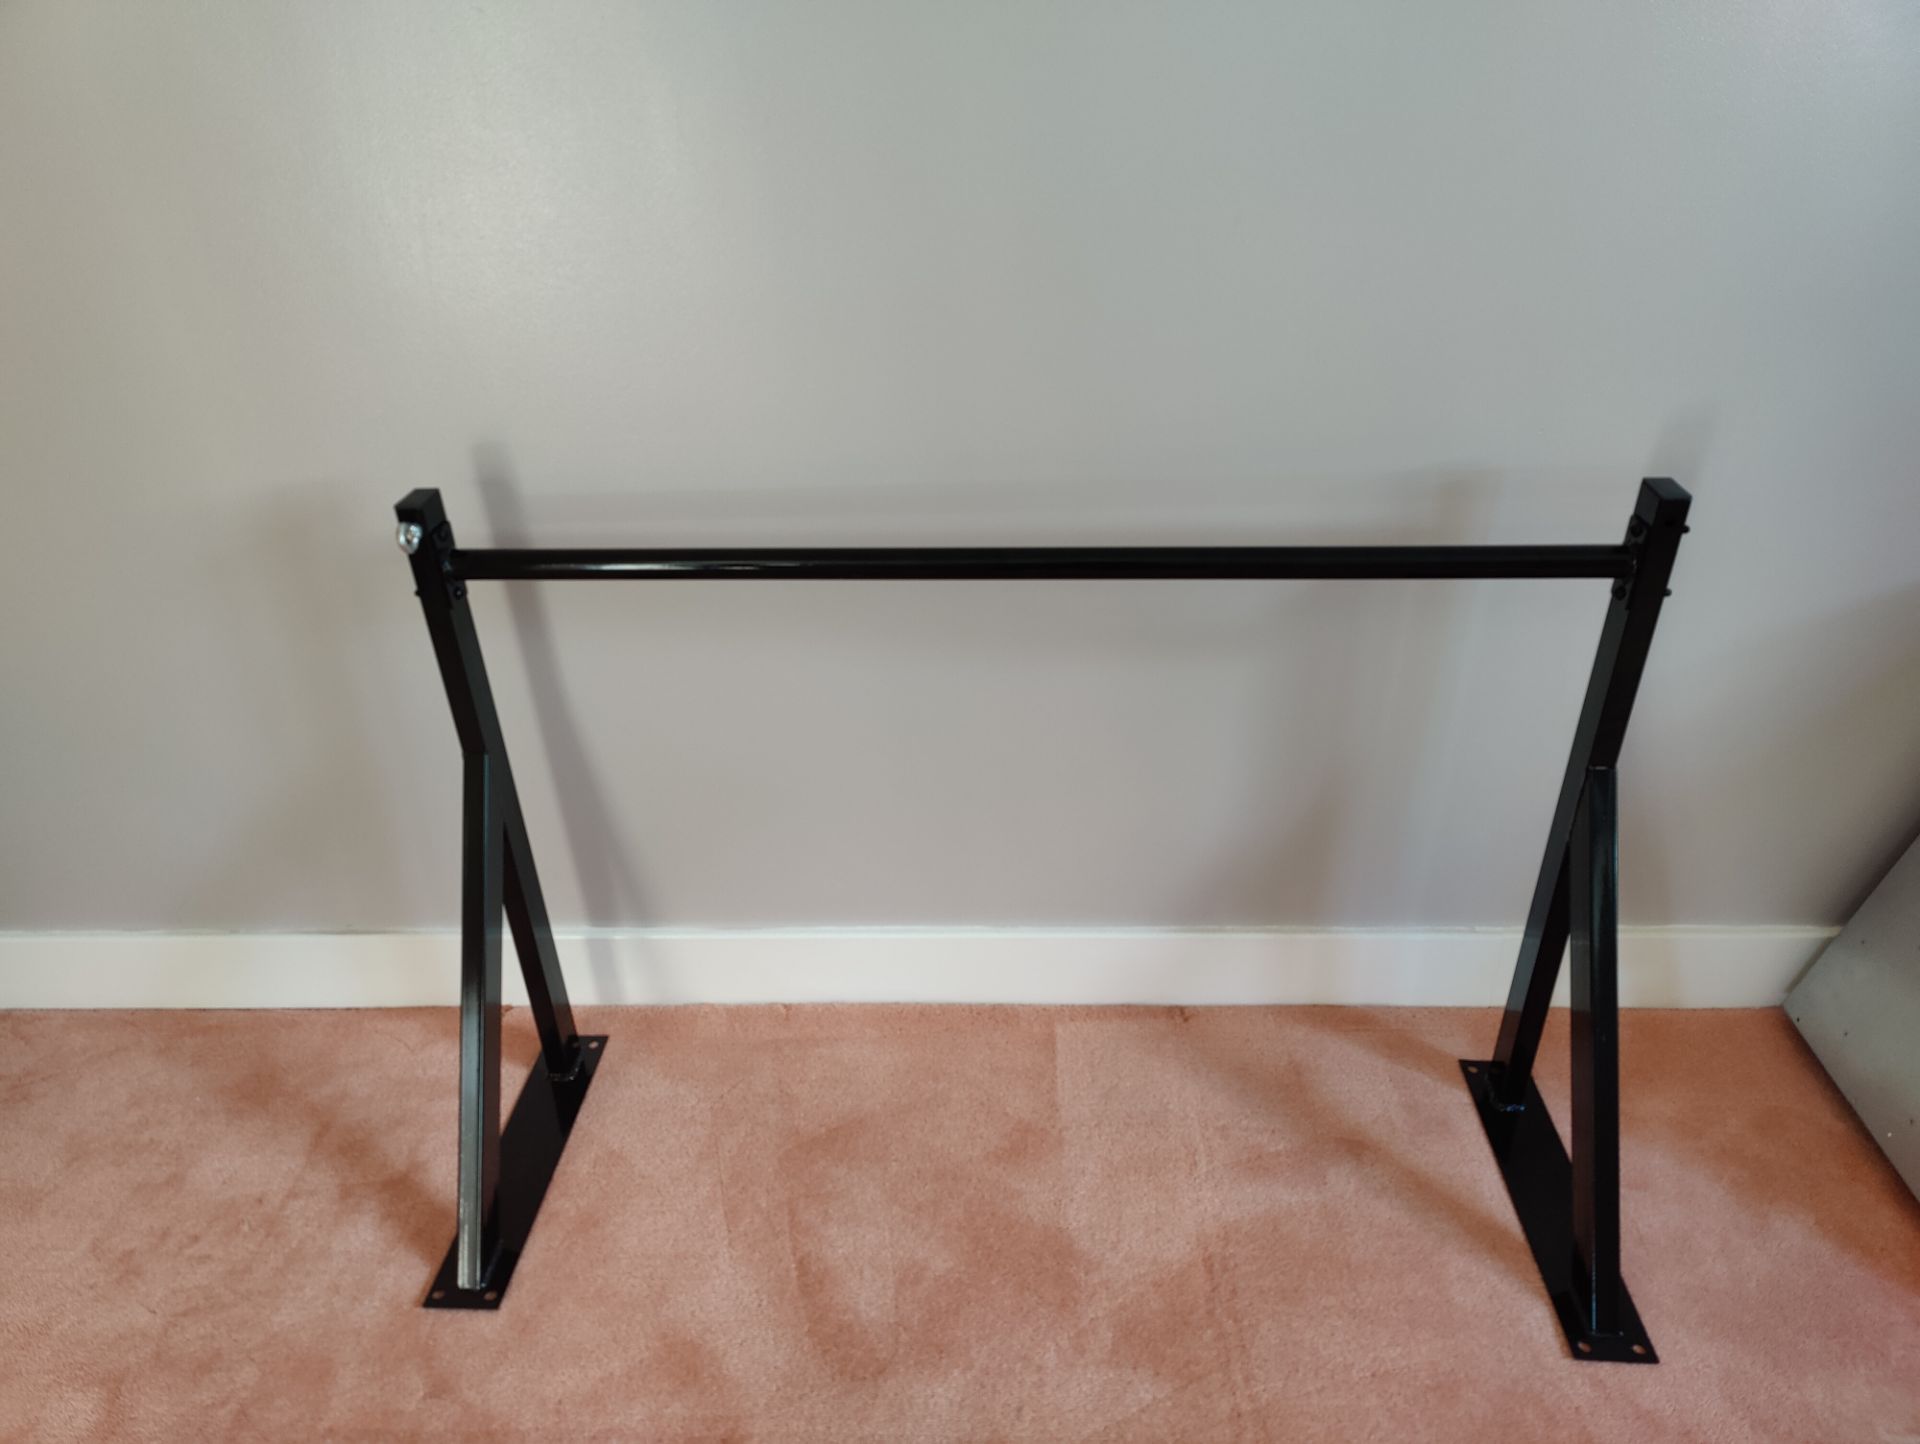 3 x Commercial Gym Wall Mounted Steel Made Pull/Push Chin Up Bar - Image 2 of 3